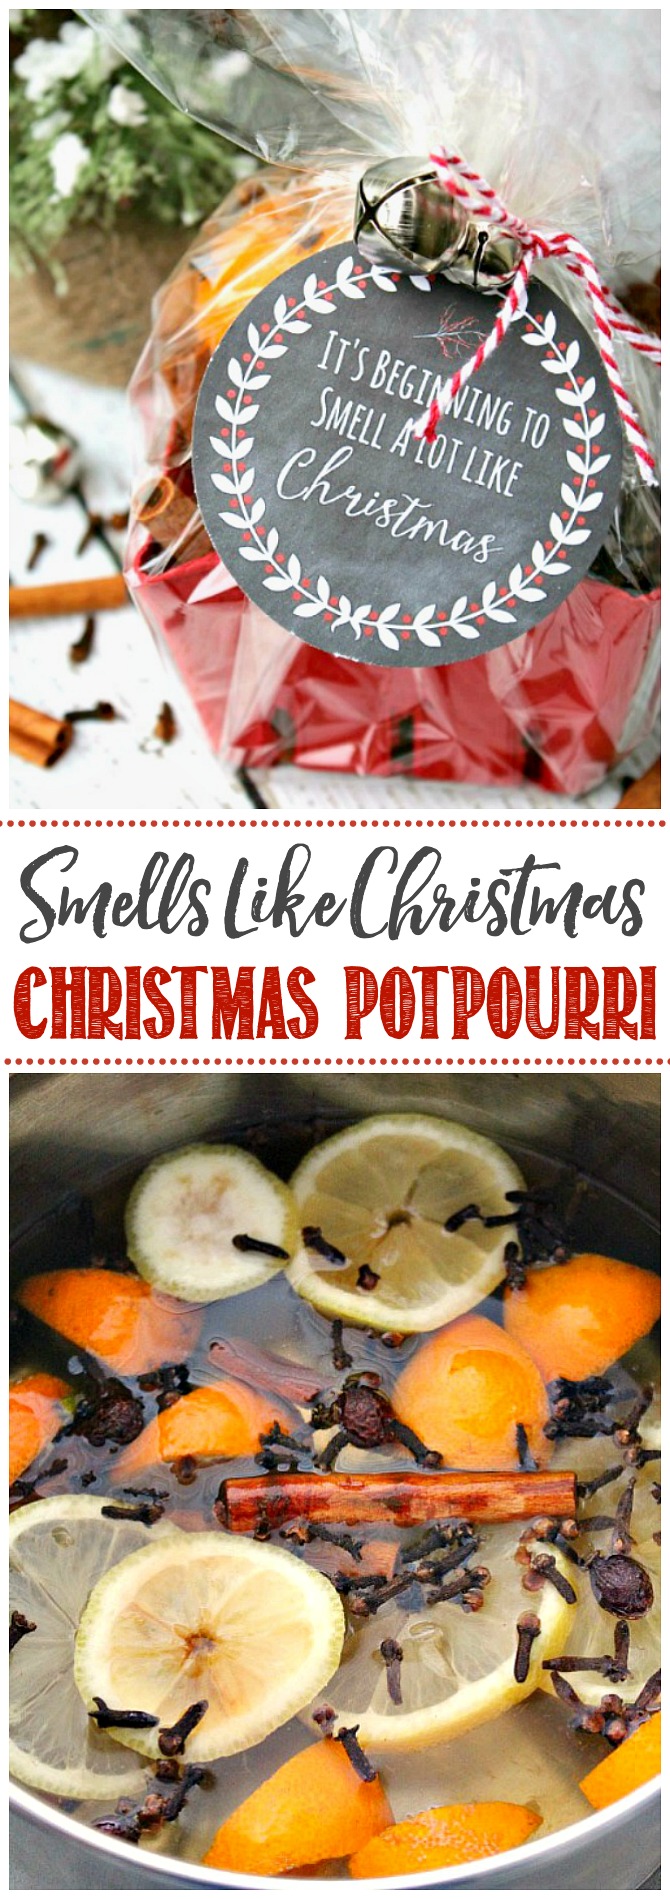 Christmas potpourri packaged up for a Christmas gift idea.